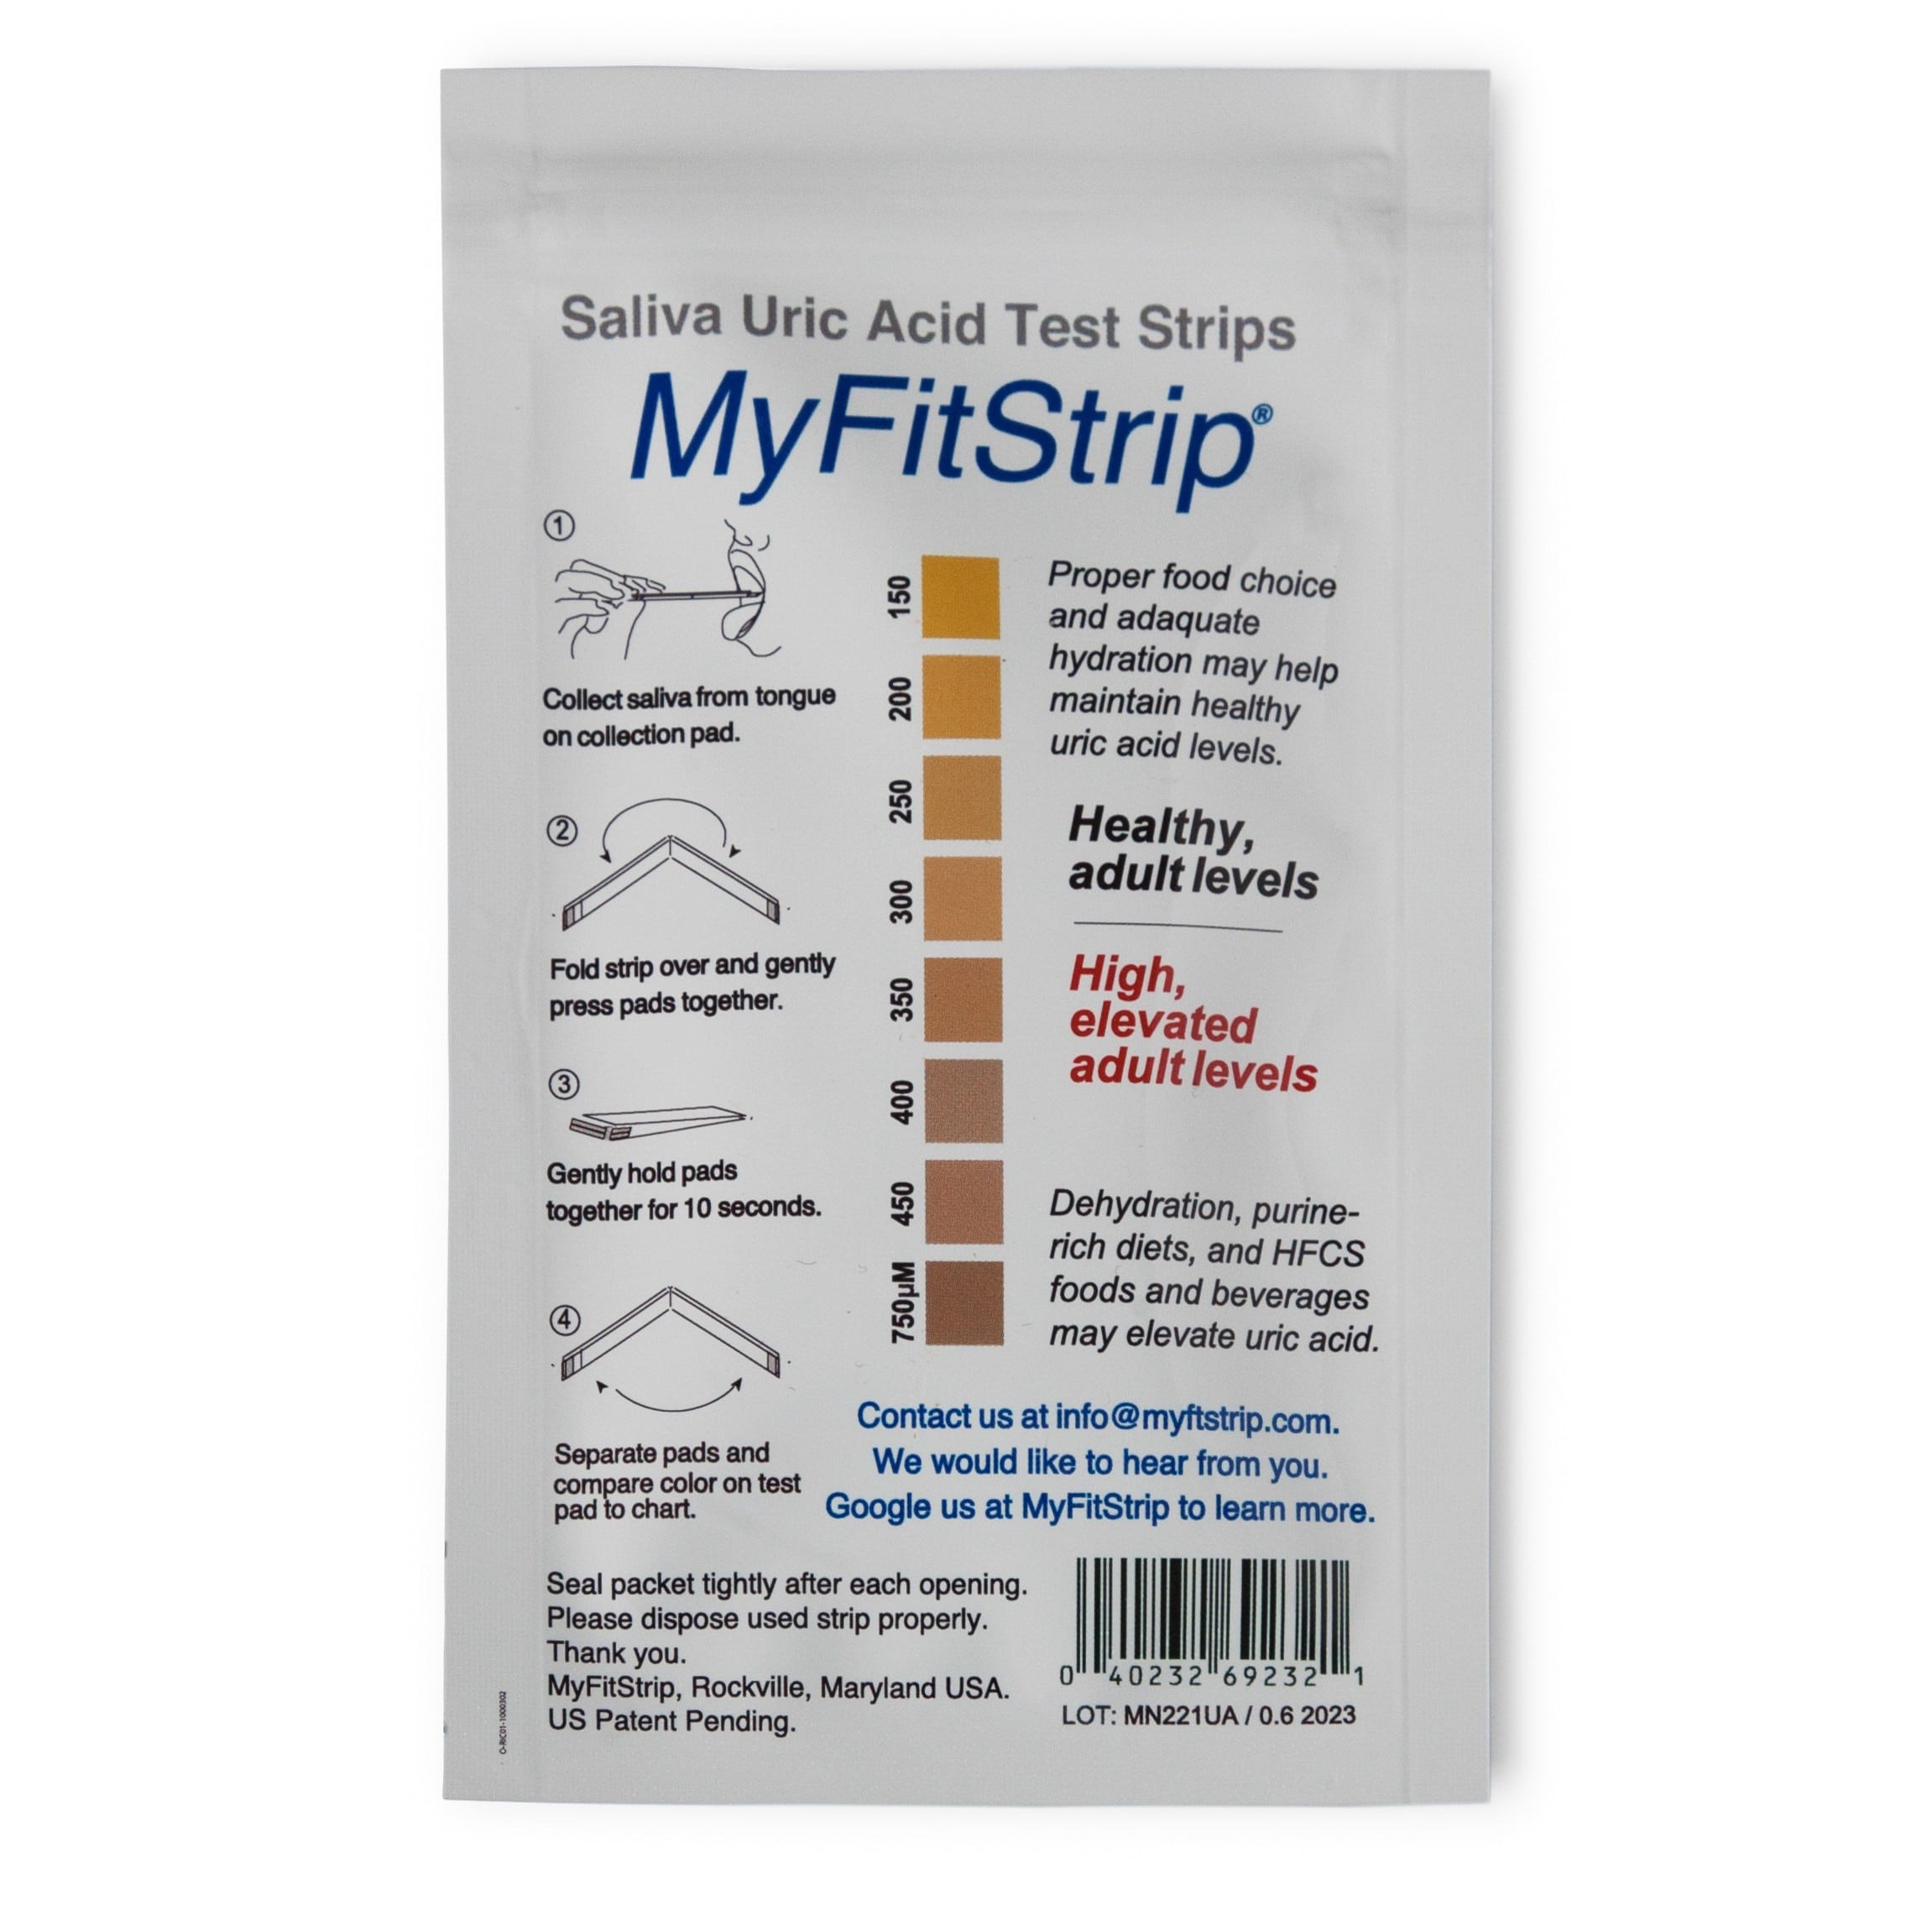 Check for inflammatory uric acid in 10 seconds with MyFitStrip's saliva testing